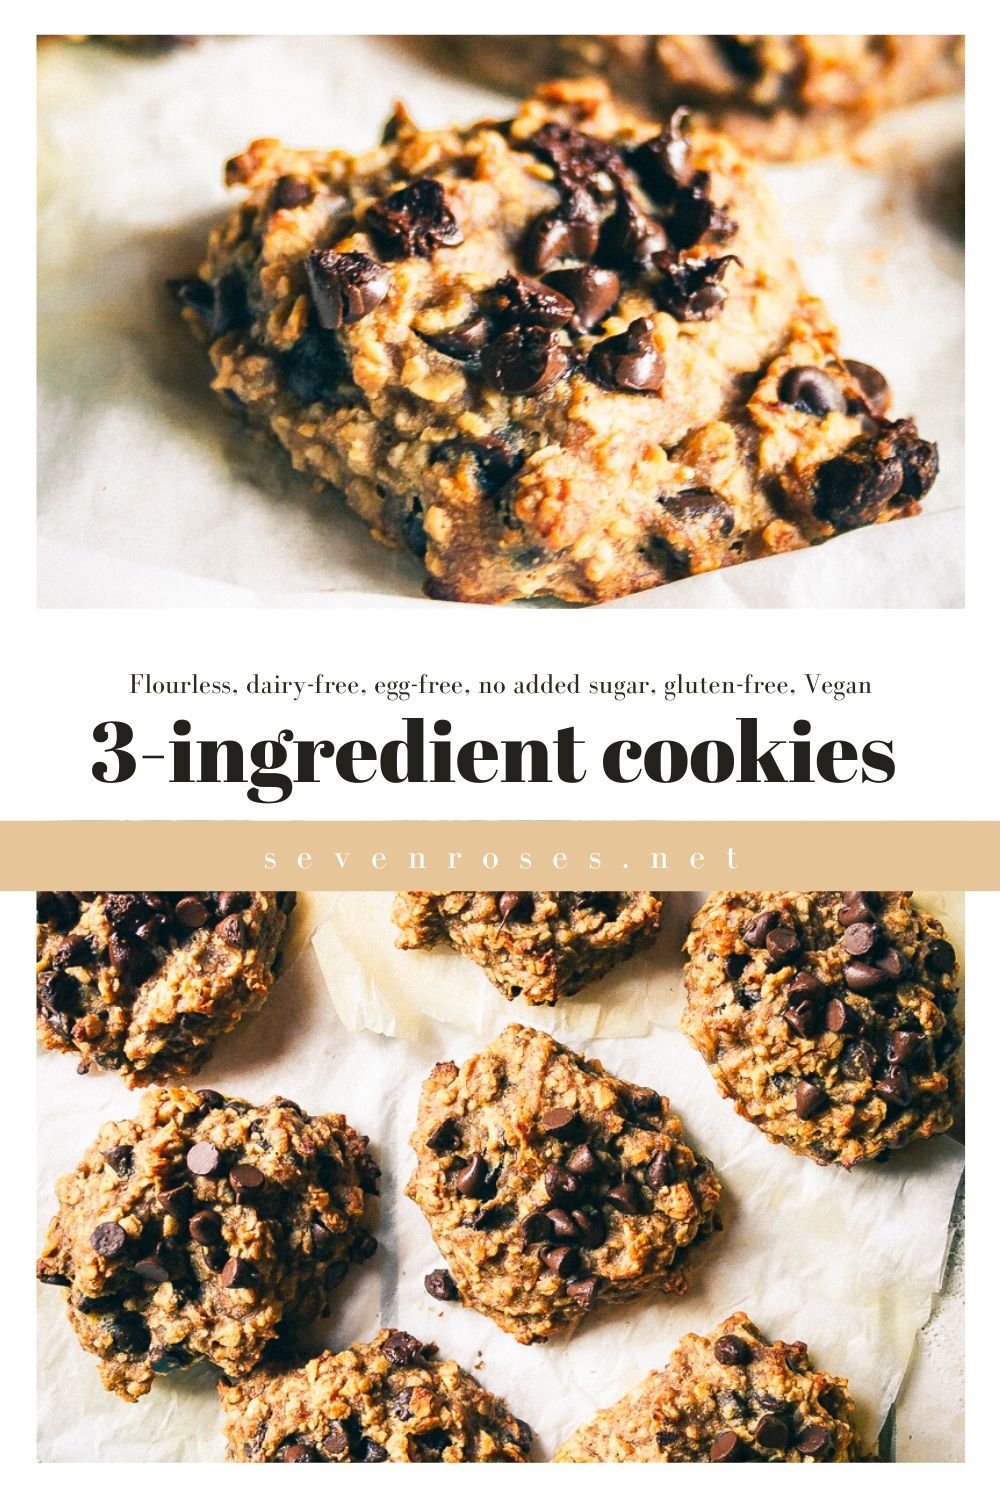 Flourless, gluten-free delicious cookies that require only 3 ingredients